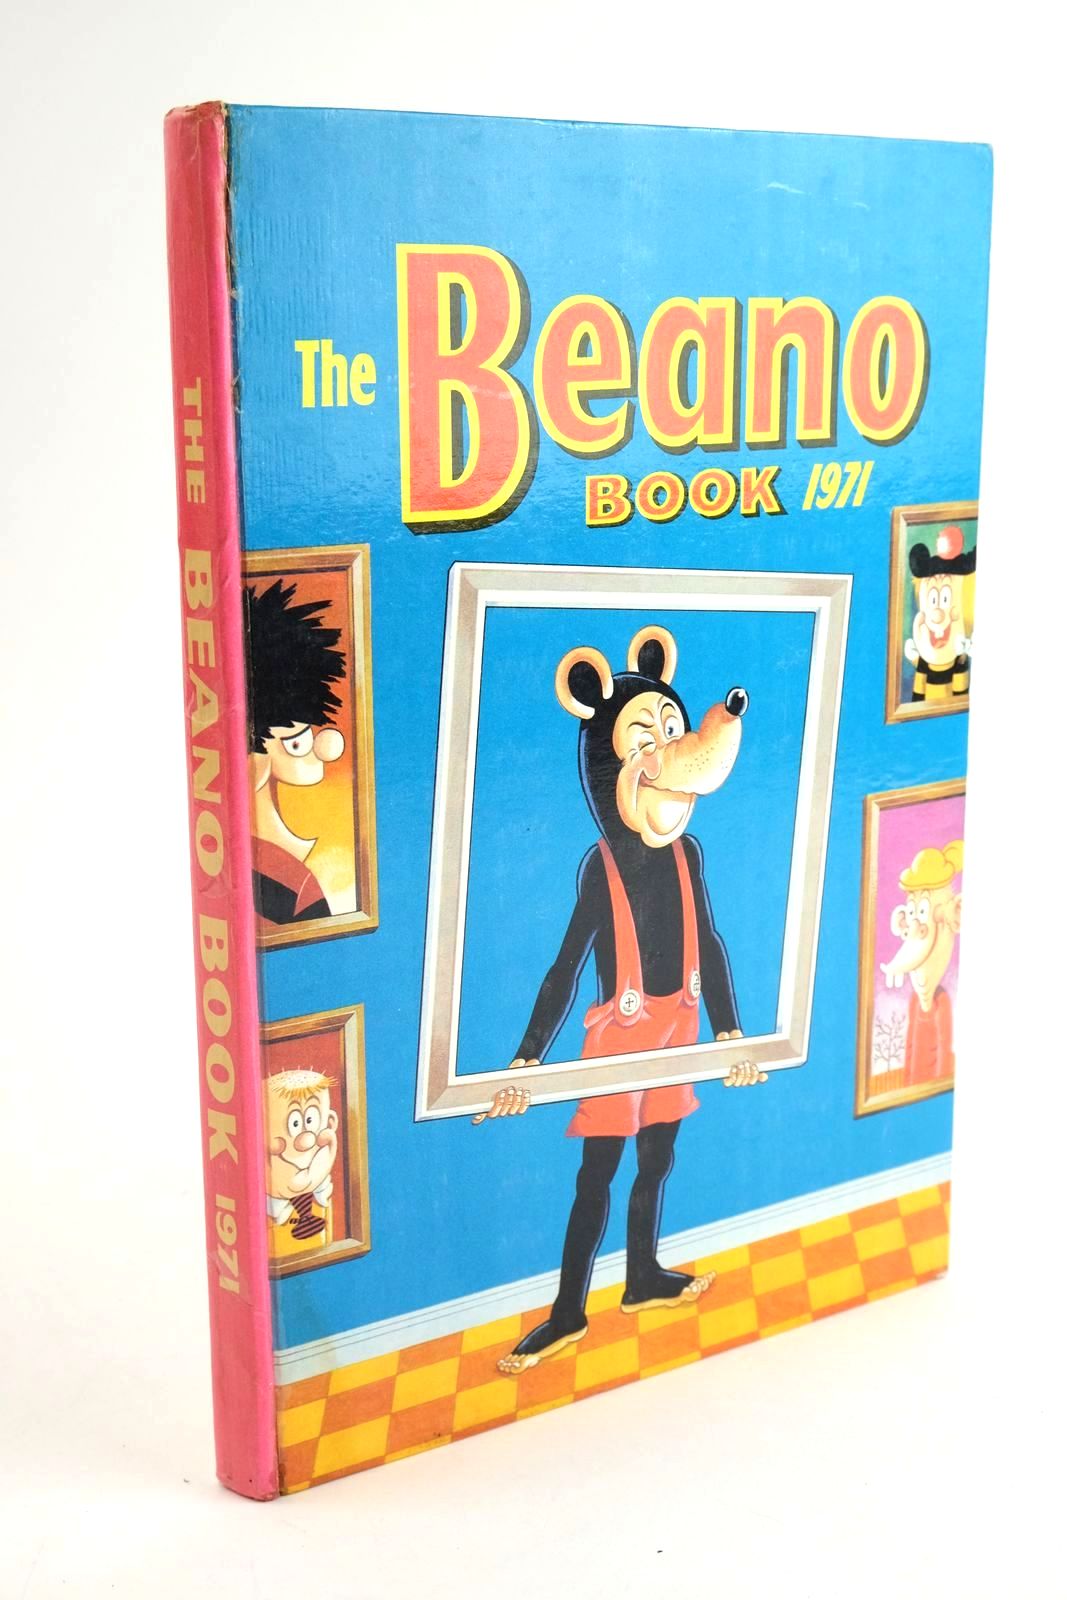 Photo of THE BEANO BOOK 1971 published by D.C. Thomson &amp; Co Ltd. (STOCK CODE: 1323574)  for sale by Stella & Rose's Books